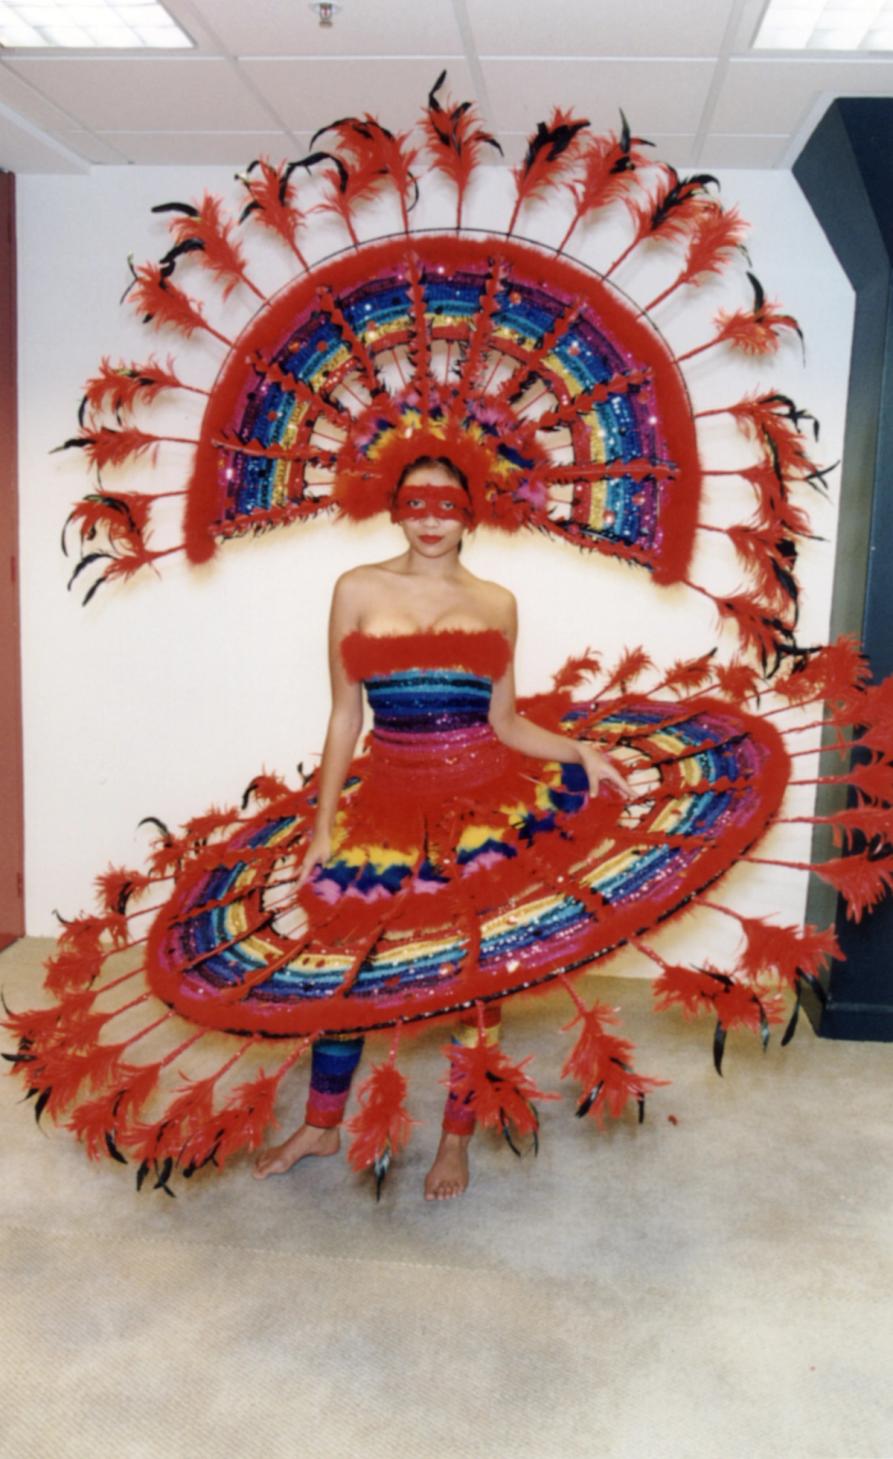 A woman dress in Rainbow dress with a stiff, circle shaped skirt and a large head dress with feathers.